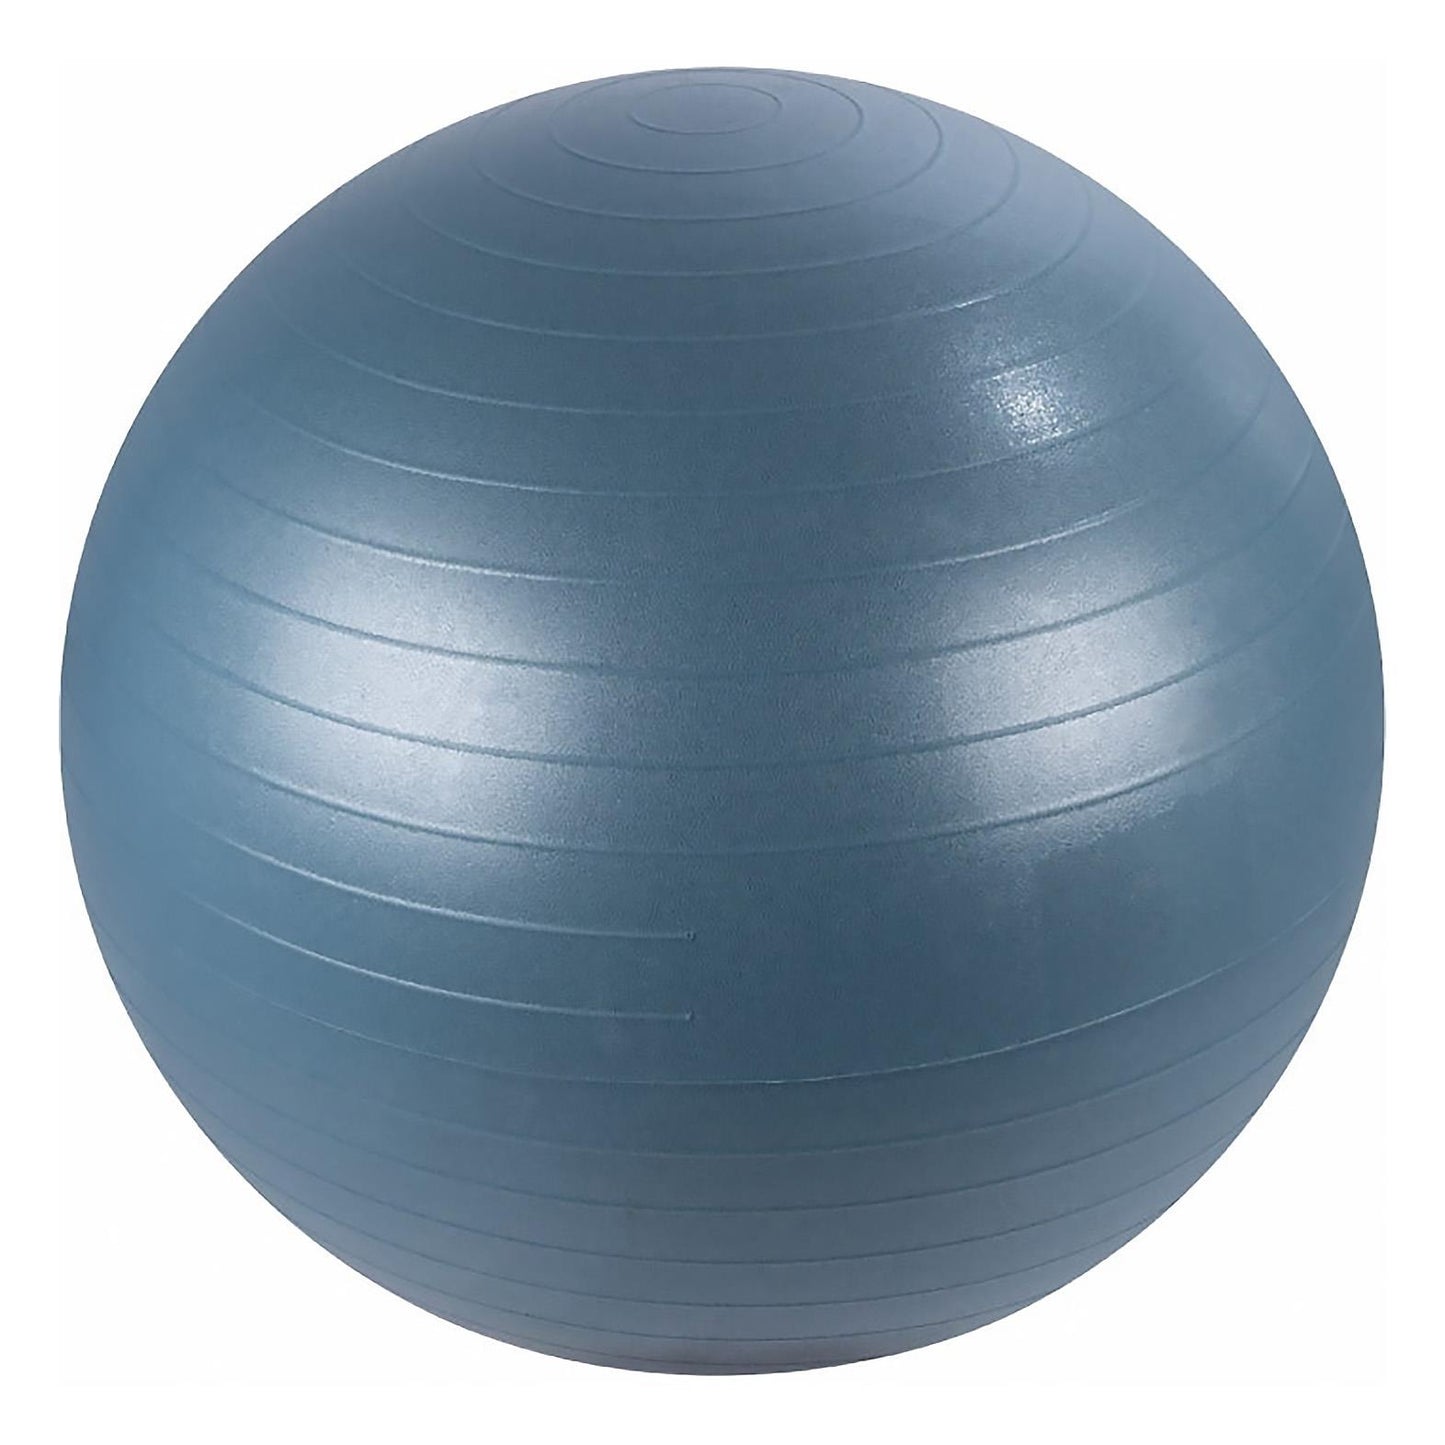 Inflatable Exercise Ball by GEEZY - UKBuyZone